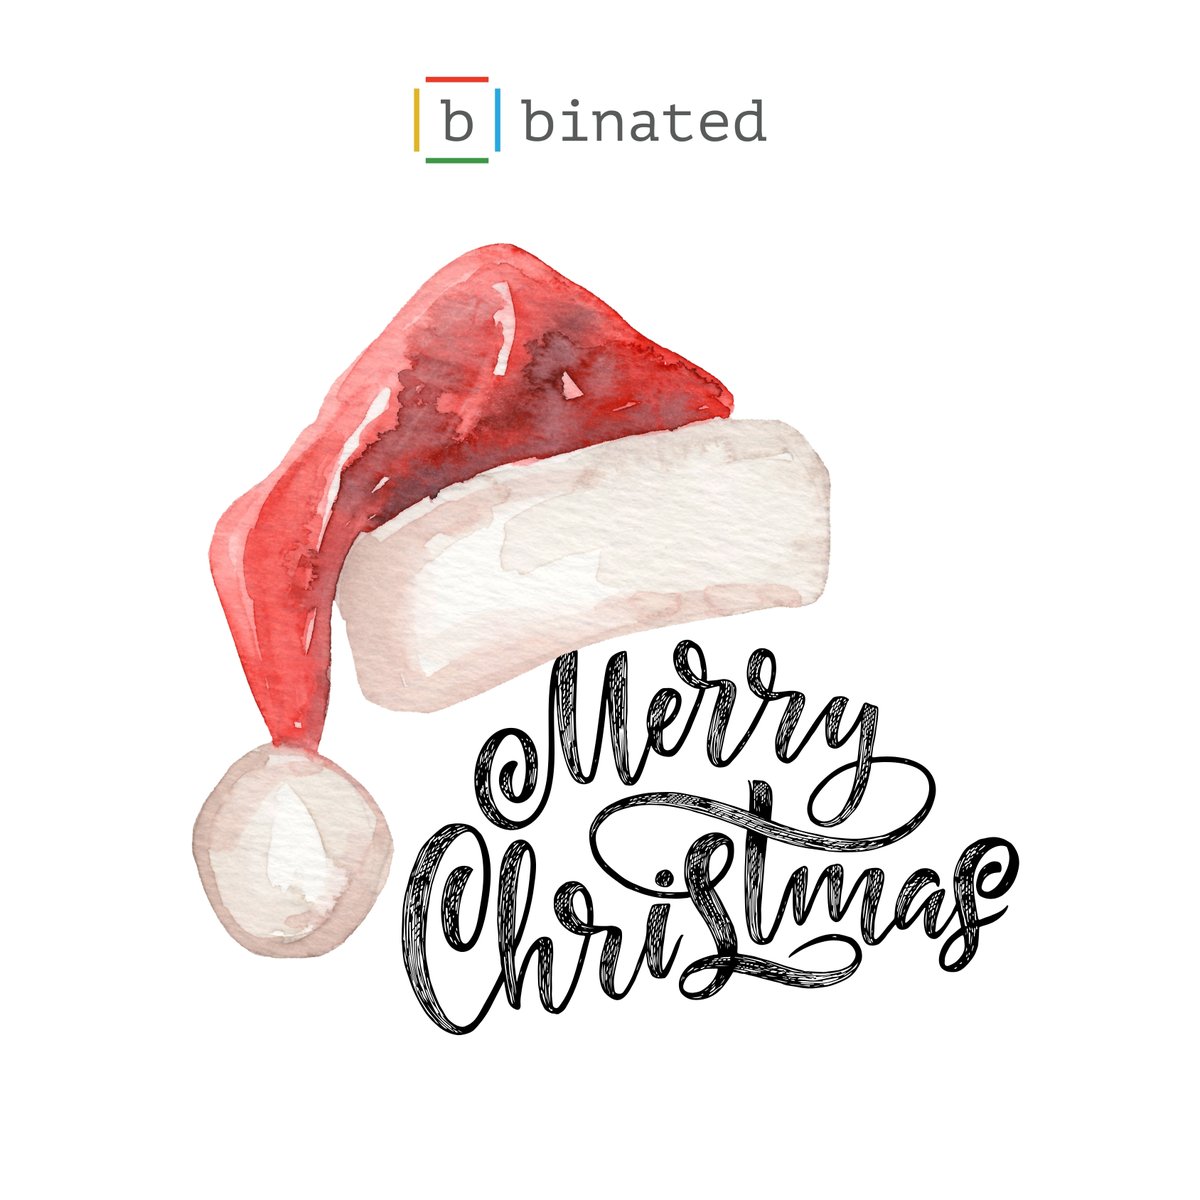 Wishing everyone a Merry Christmas and a great year ahead!
#binated

#pune #shillong #houston #b2b #graphicservices #bposervices #backofficeoperations #digitaltransformation #technology #customerservice